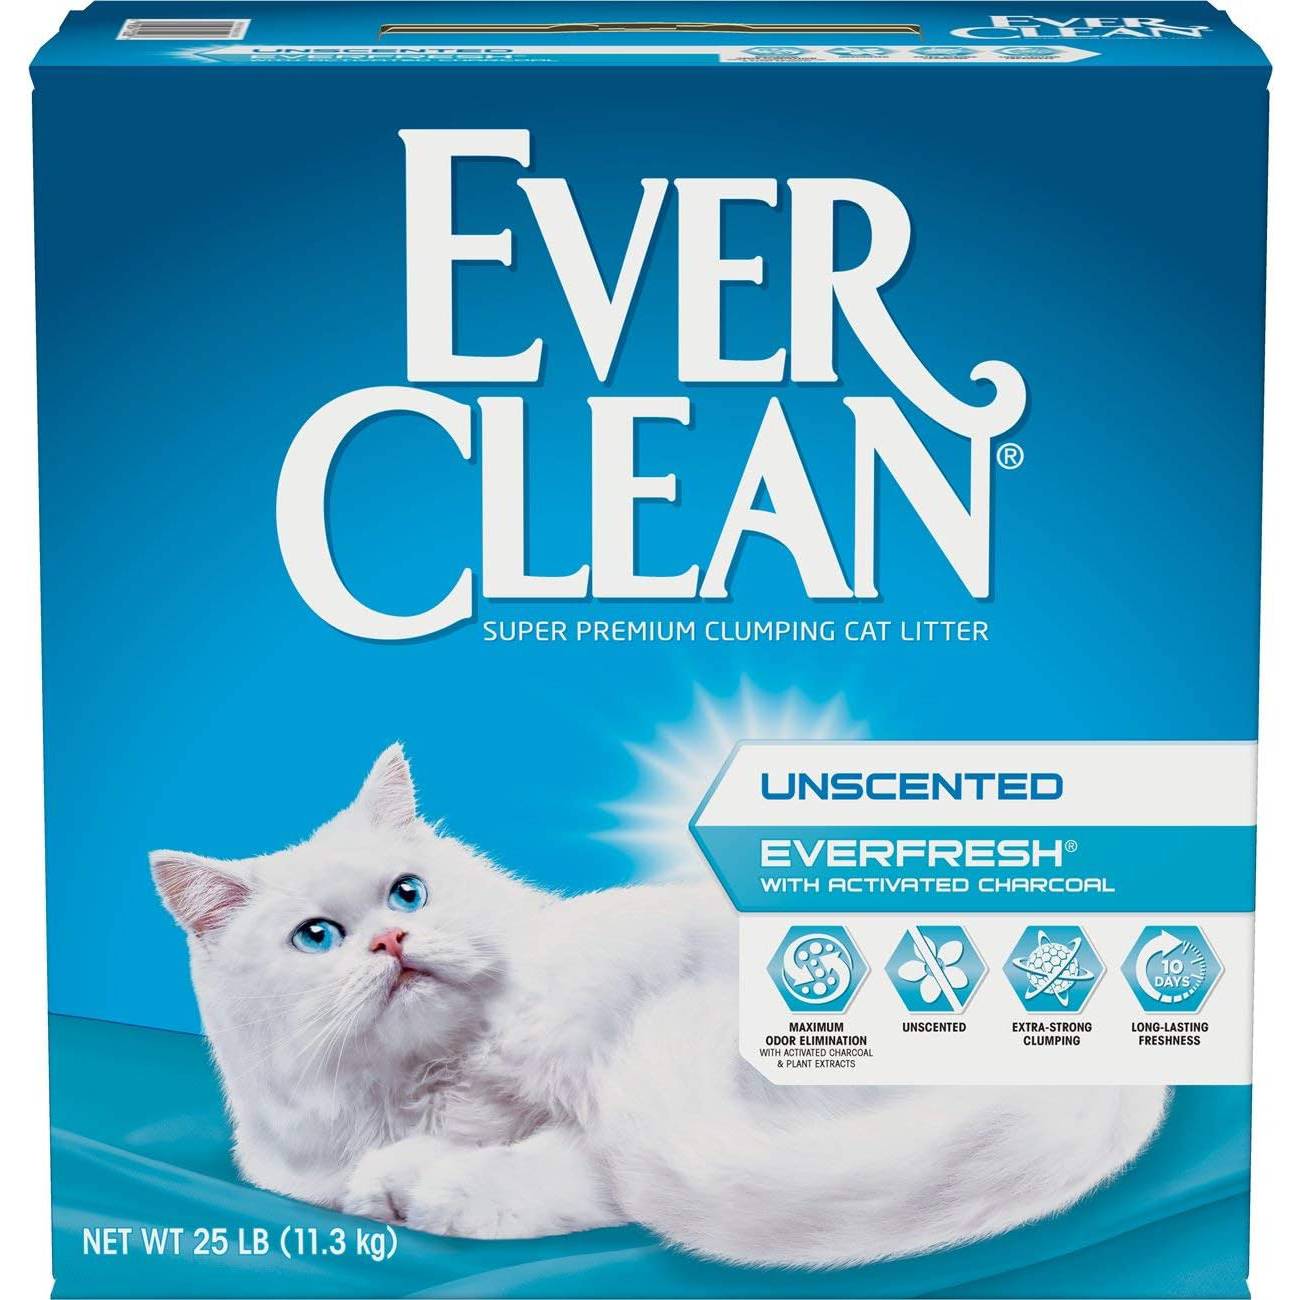 Ever Clean Unscented Clumping Clay Cat Litter